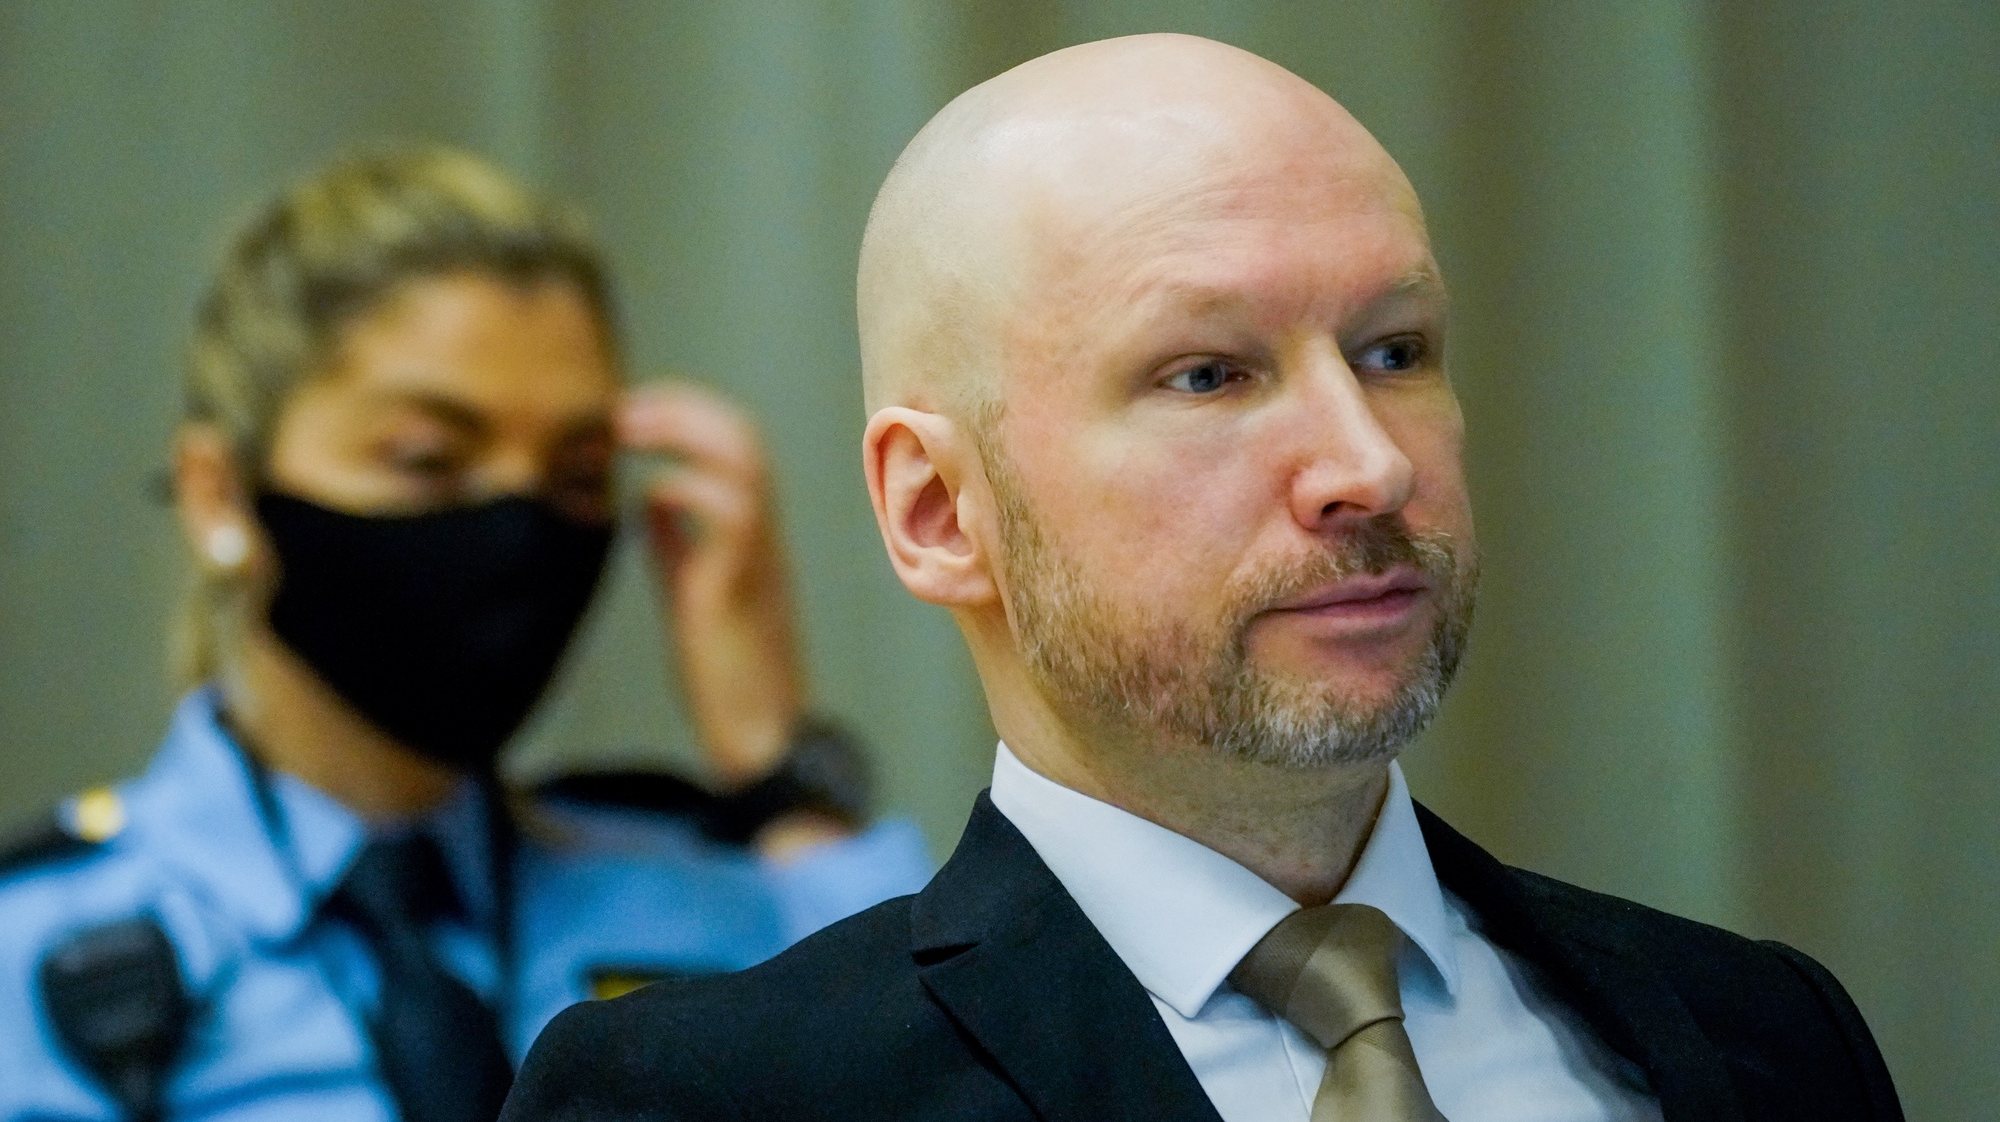 epa09692606 Anders Behring Breivik, convicted of terrorism, attends the first day of his parole hearing, in Skien, Norway, 18 January 2022. Breivik, who changed his name to Fjotolf Hansen in 2017, is to appear before court for his three-days parole hearing in Oslo on 18 January 2022. Mass murderer Anders Behring Breivik was sentenced to a maximum term of 21 years for killing 77 people in bomb and shooting attacks on 22 July 2011, and is entitled under Norwegian law to have his sentenced reviewed after ten years served. The case is being processed by Telemark District Court, but is physically taking place in a makeshift courtroom in Skien prison.  EPA/Ole Berg-Rusten / POOL NORWAY OUT